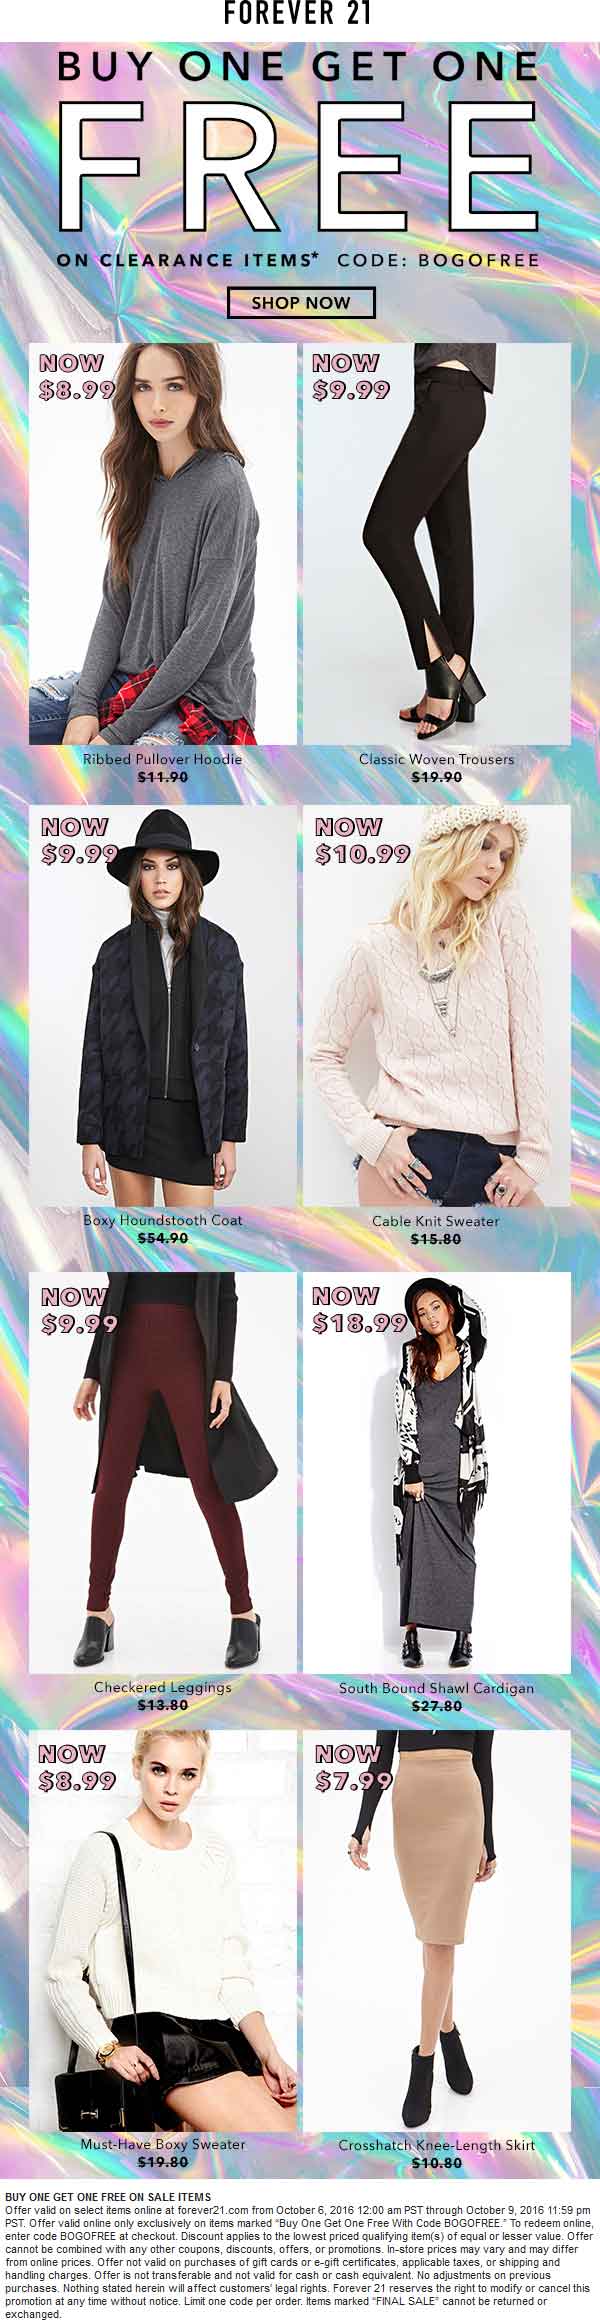 Forever 21 Coupon April 2024 Second clearance item free online at Forever 21 via promo code BOGOFREE